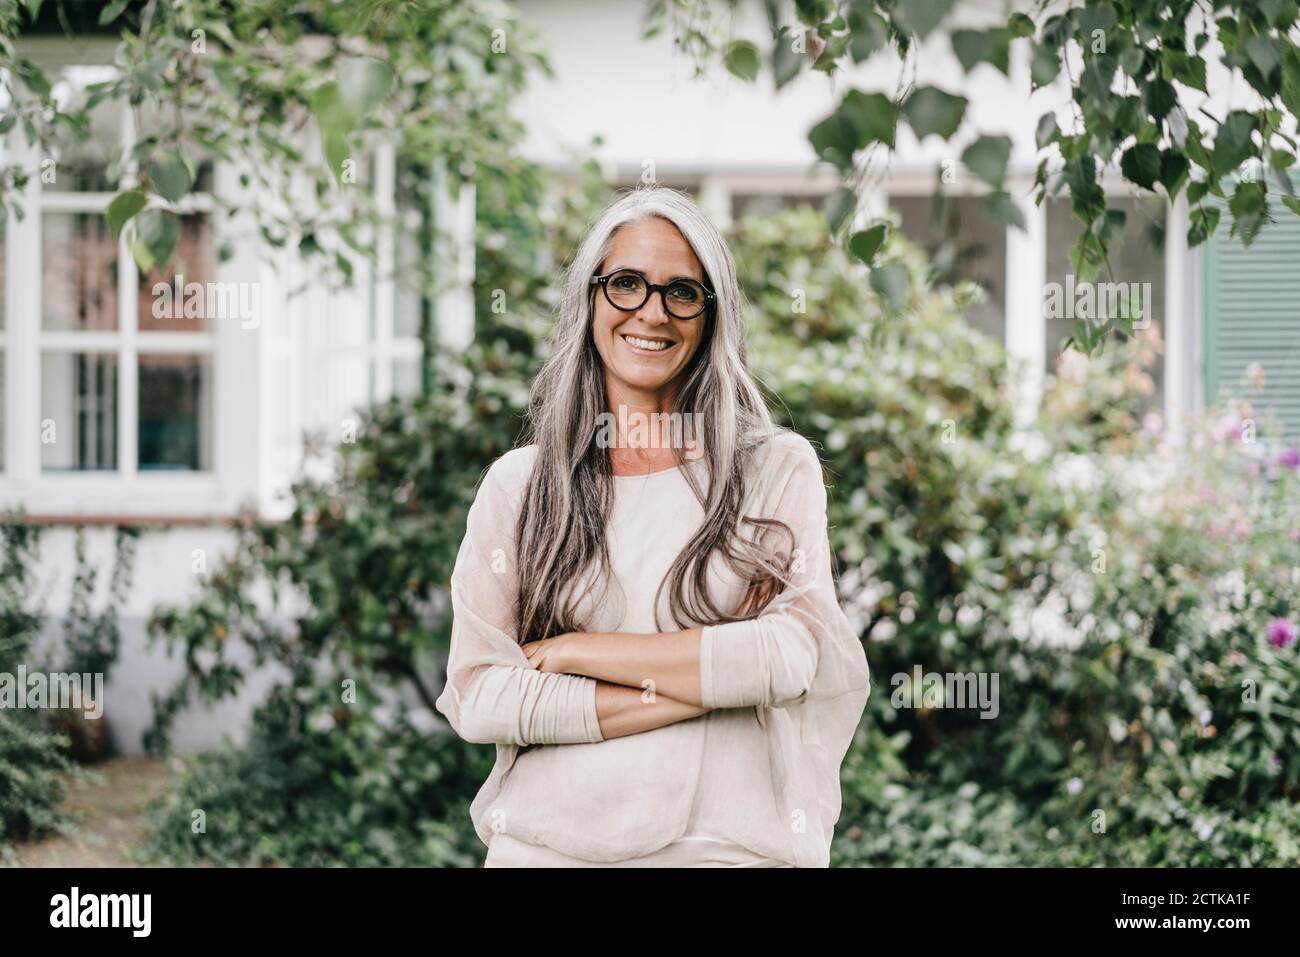 Portrait of smiling woman with long grey hair wearing spectacles standing in the garden Stock Photo